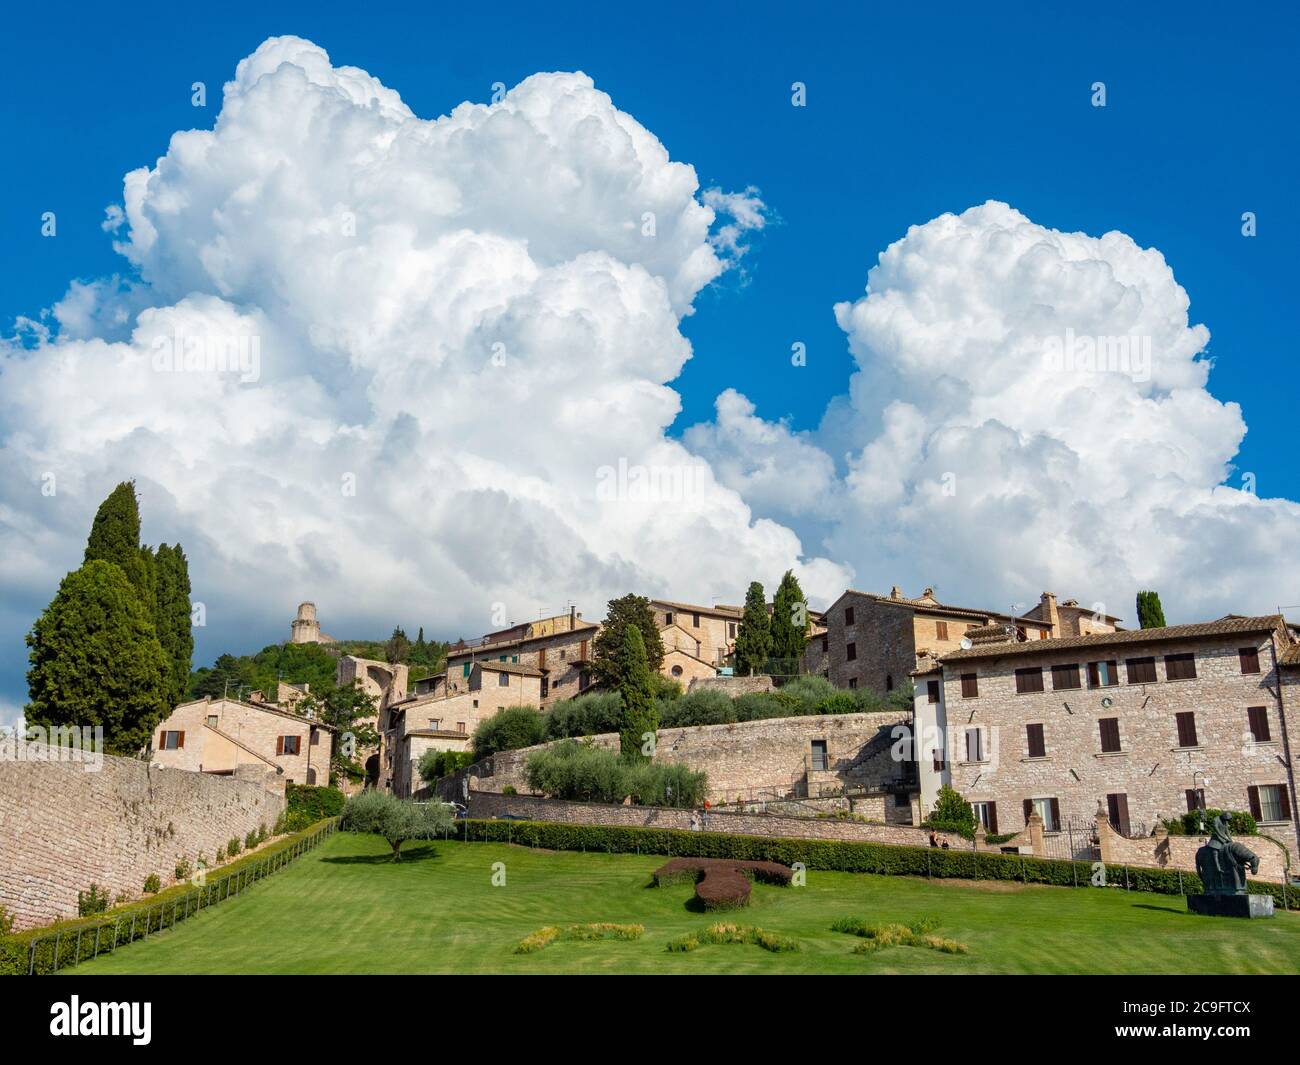 saint francis of assisi italy